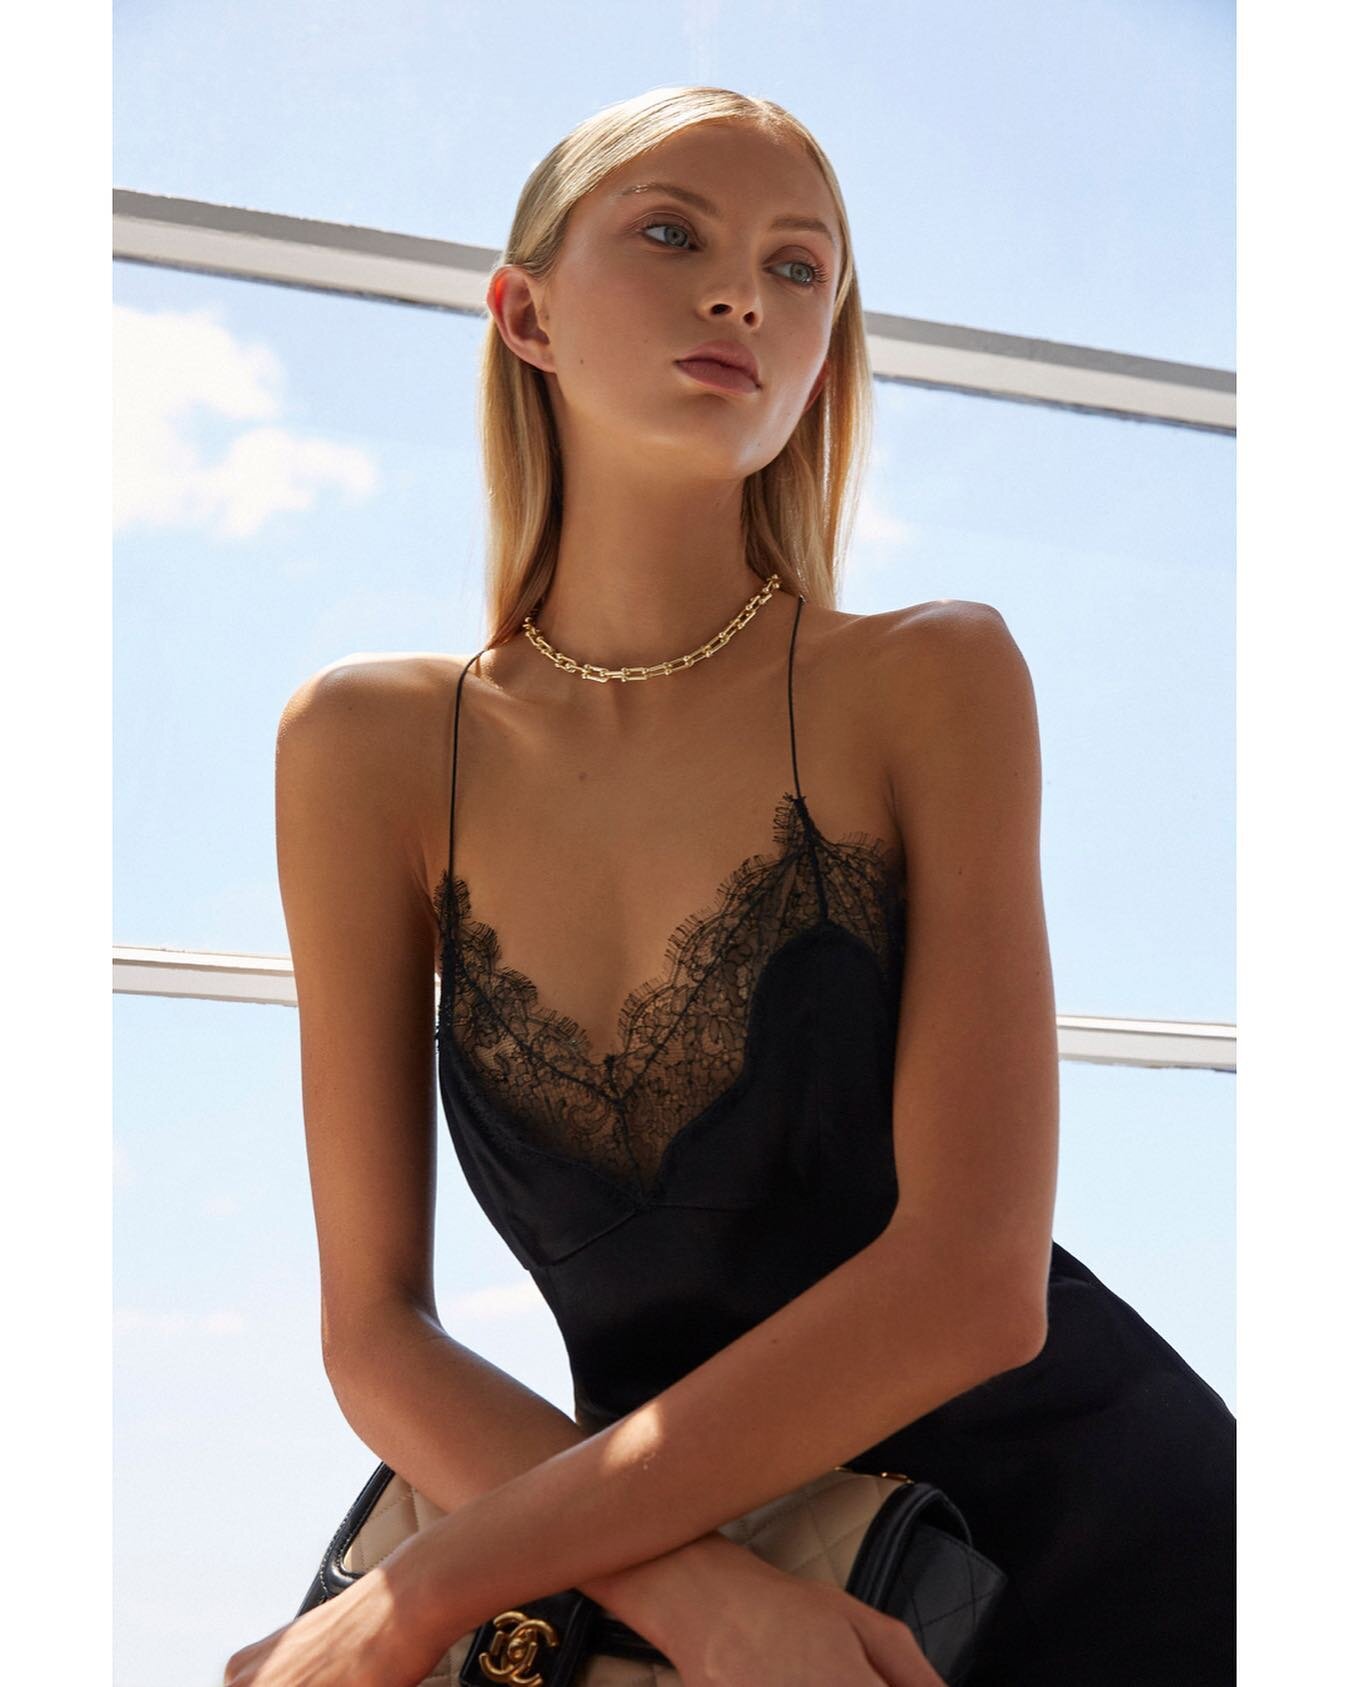 &bull; Love &amp; Lace &bull;

Featuring @lucy.baddeley 

Photographer @melcartmer_photographer 

Beauty @helensmakeupartist 

#louisvuitton #chanel #sydney #stylist #fashion #dylanjoelstylist